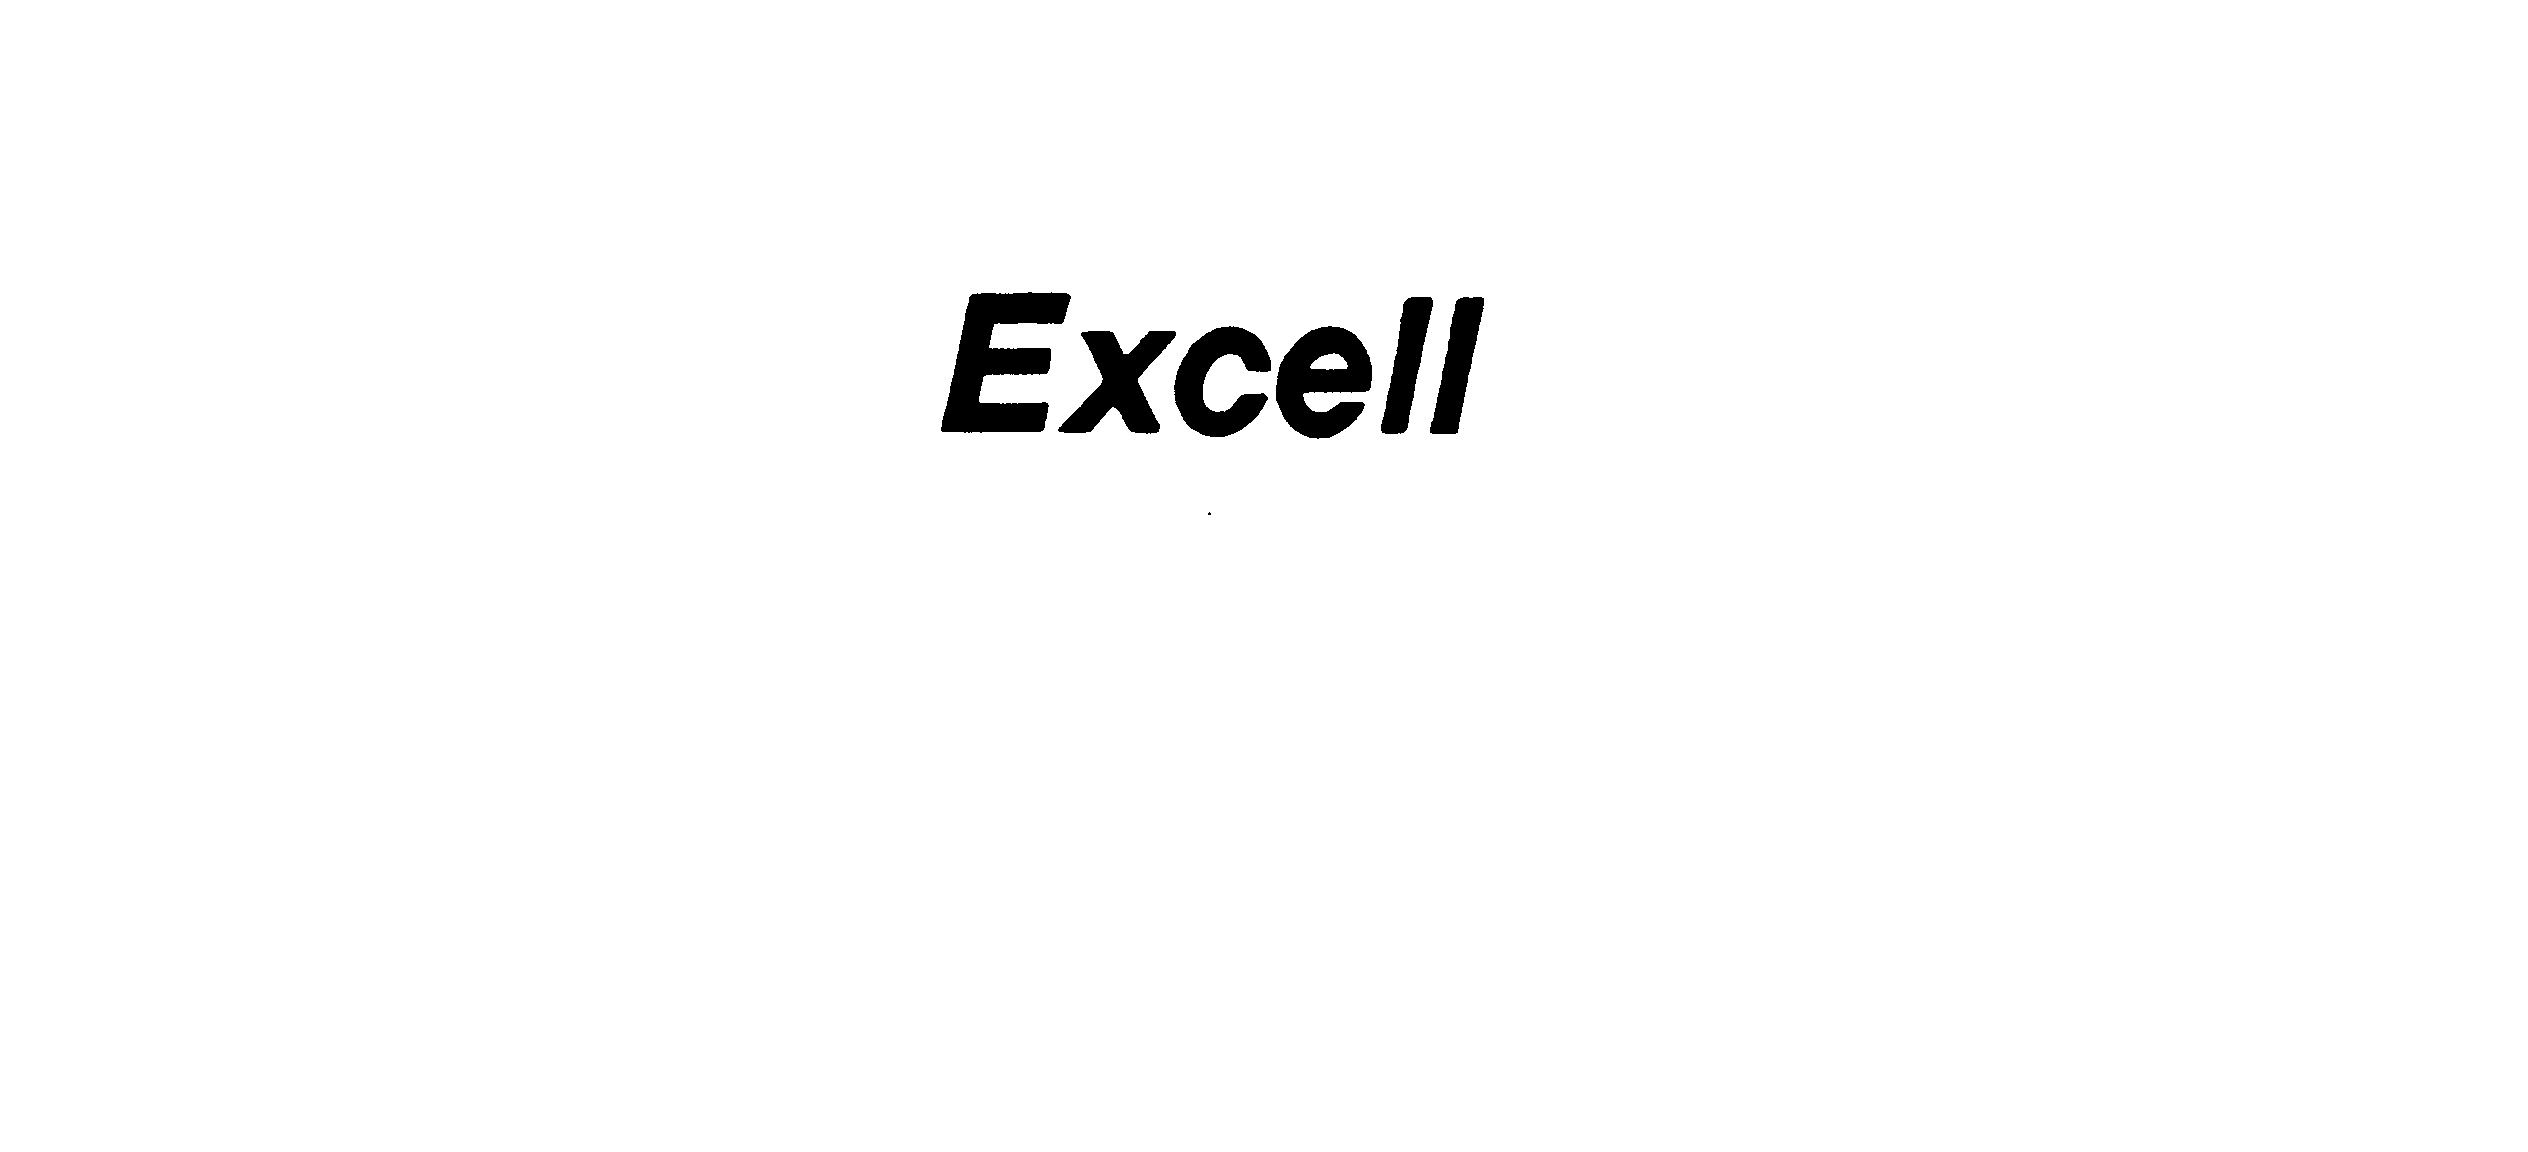 EXCELL